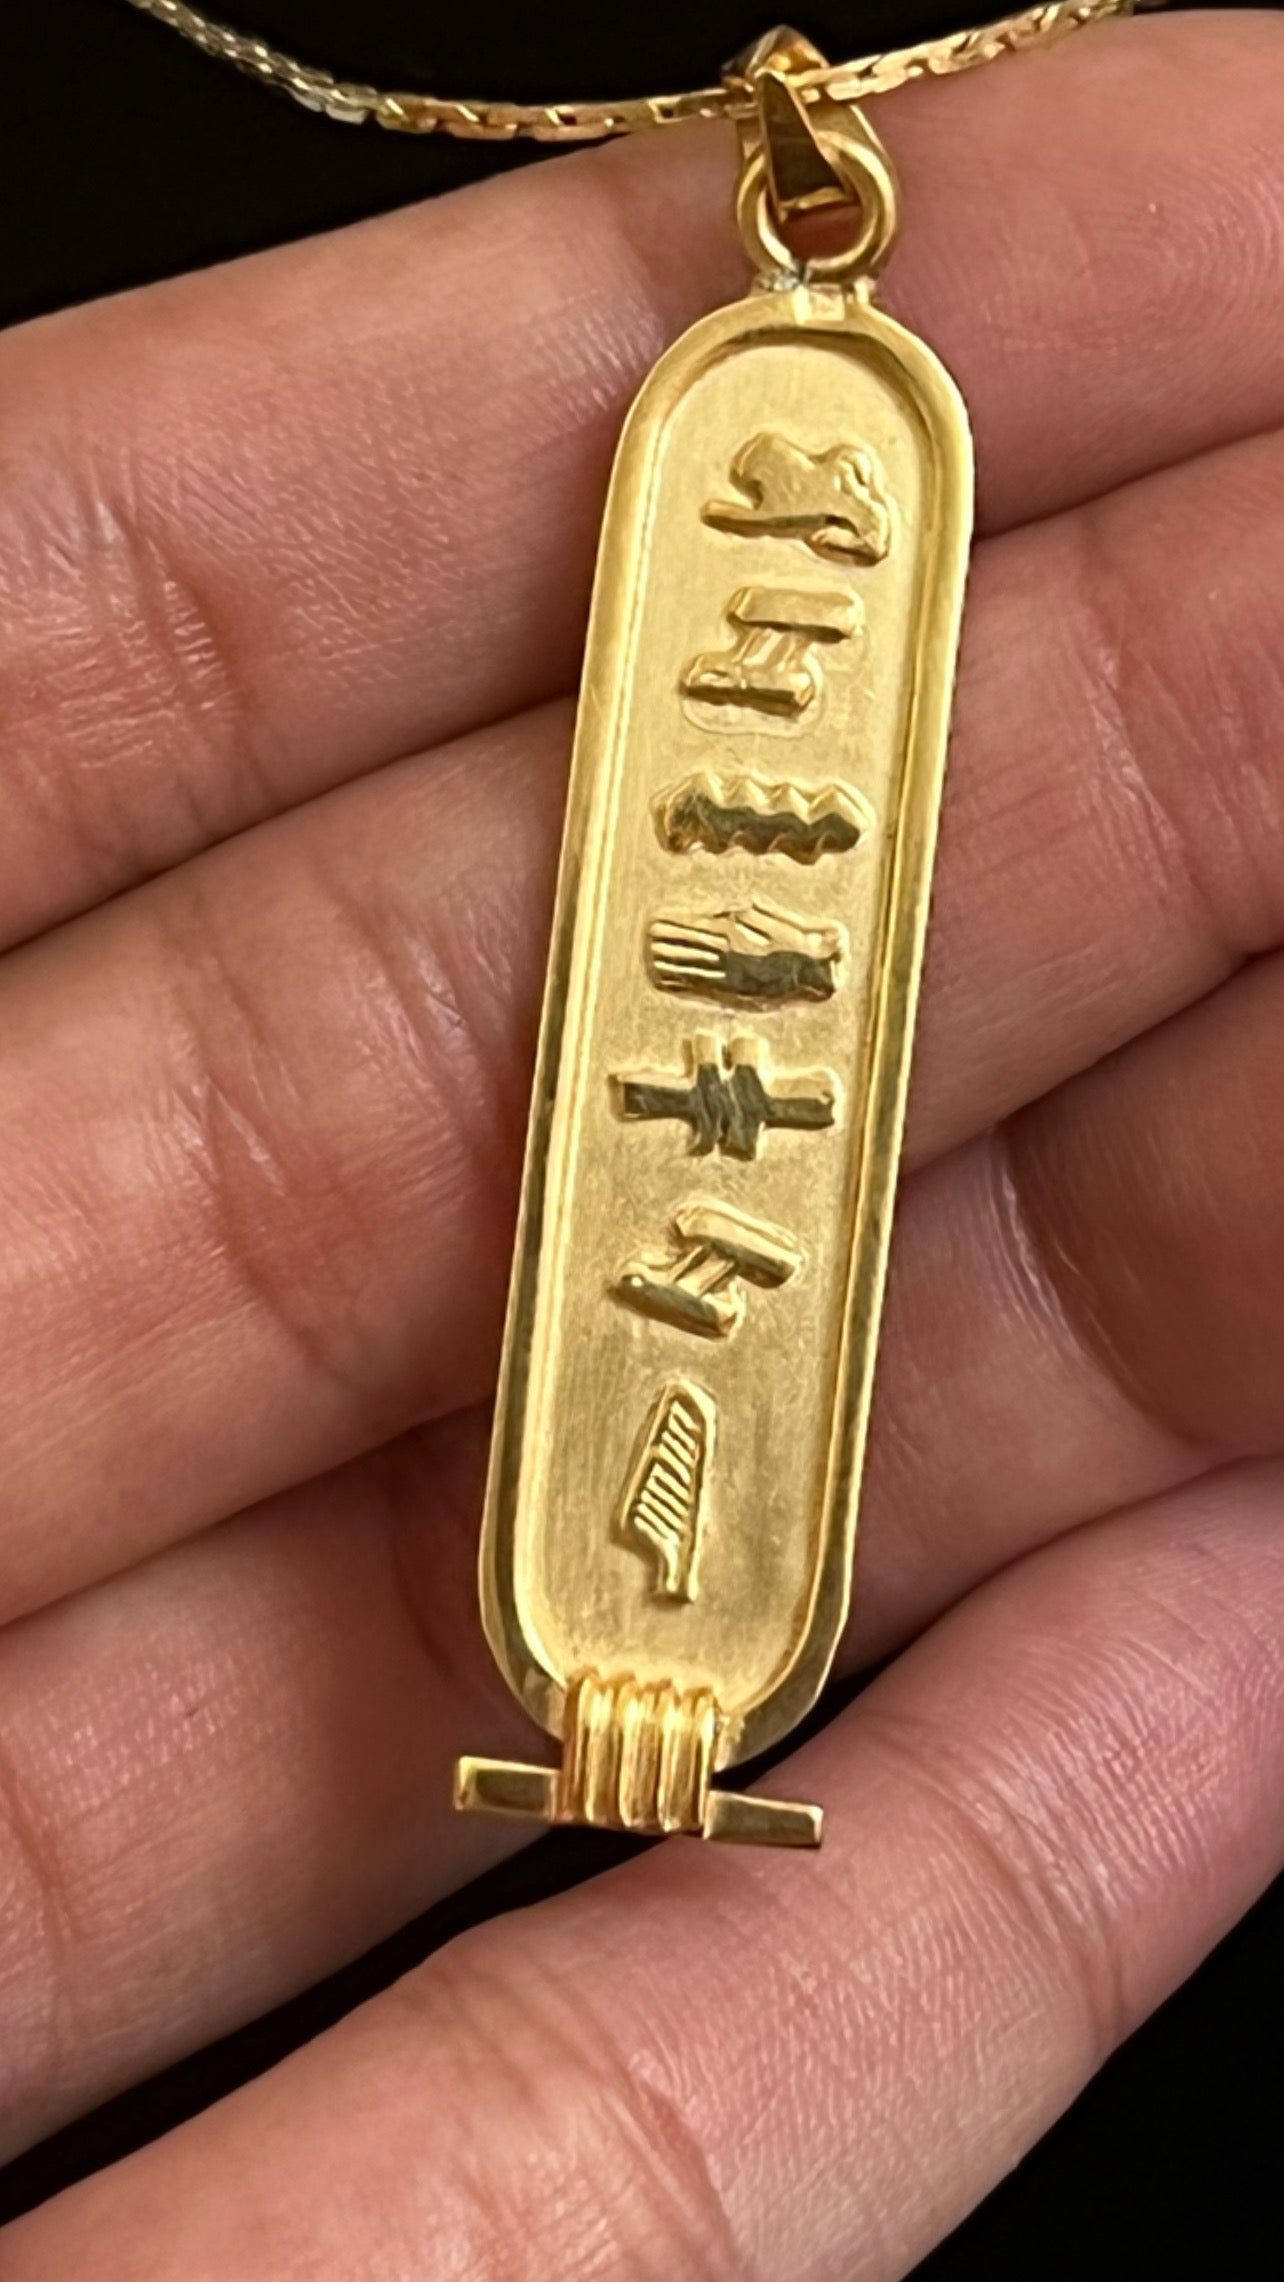 Lot - AN UNMARKED EGYPTIAN CARTOUCHE PENDANT WITH GOLD HYGRYLPHS AS WELL AS  A DAGGER BROOCH WITH ARABIC HALLMARKS. TOTAL WEIGHT 11.6G